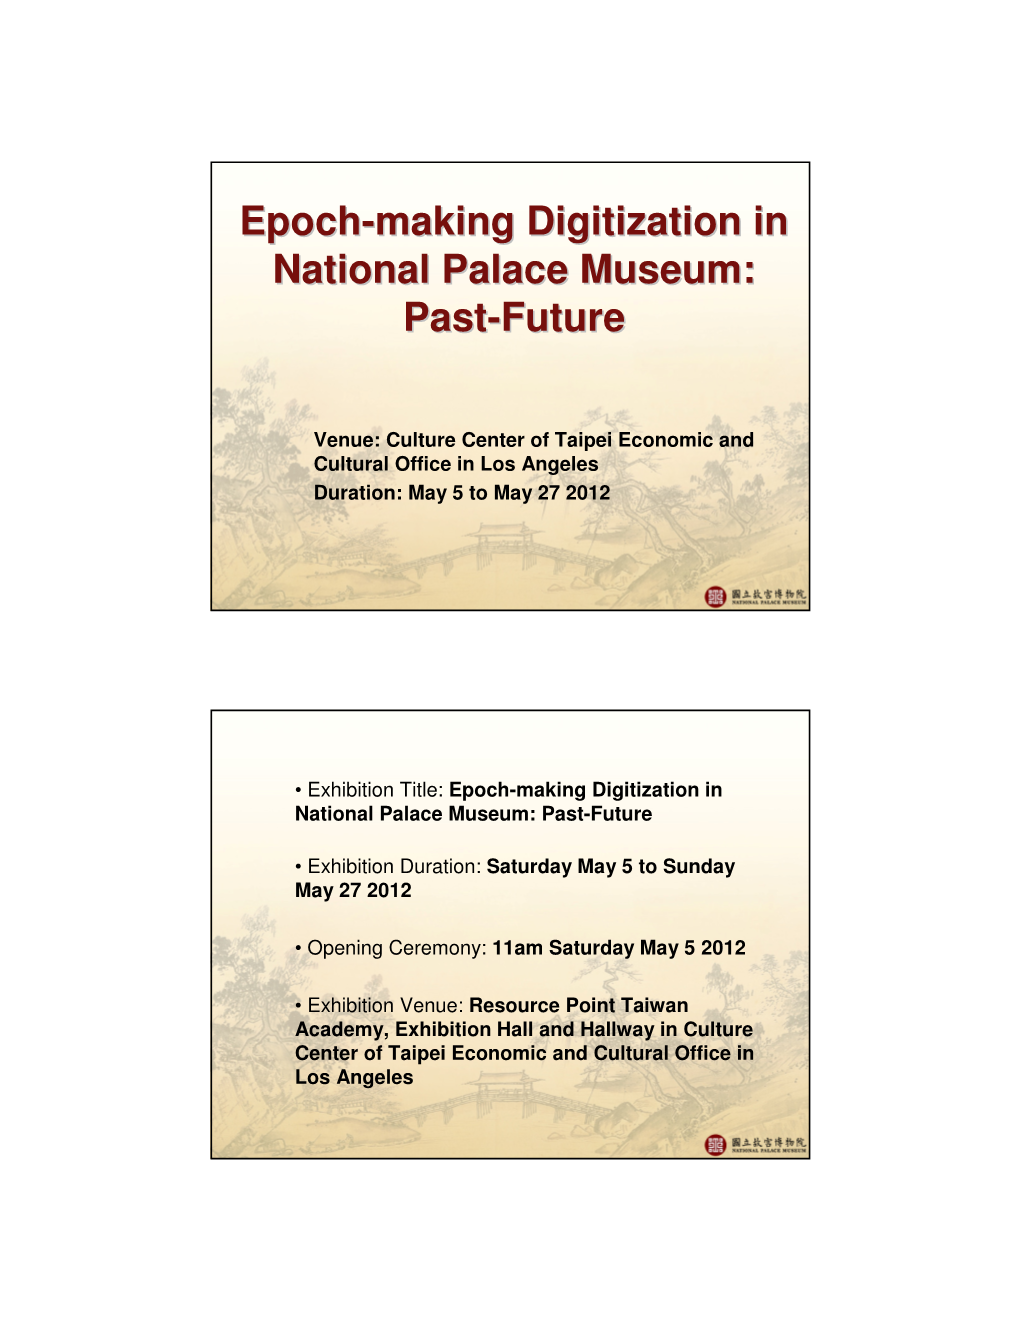 Epoch-Making Digitization in National Palace Museum: Past-Future